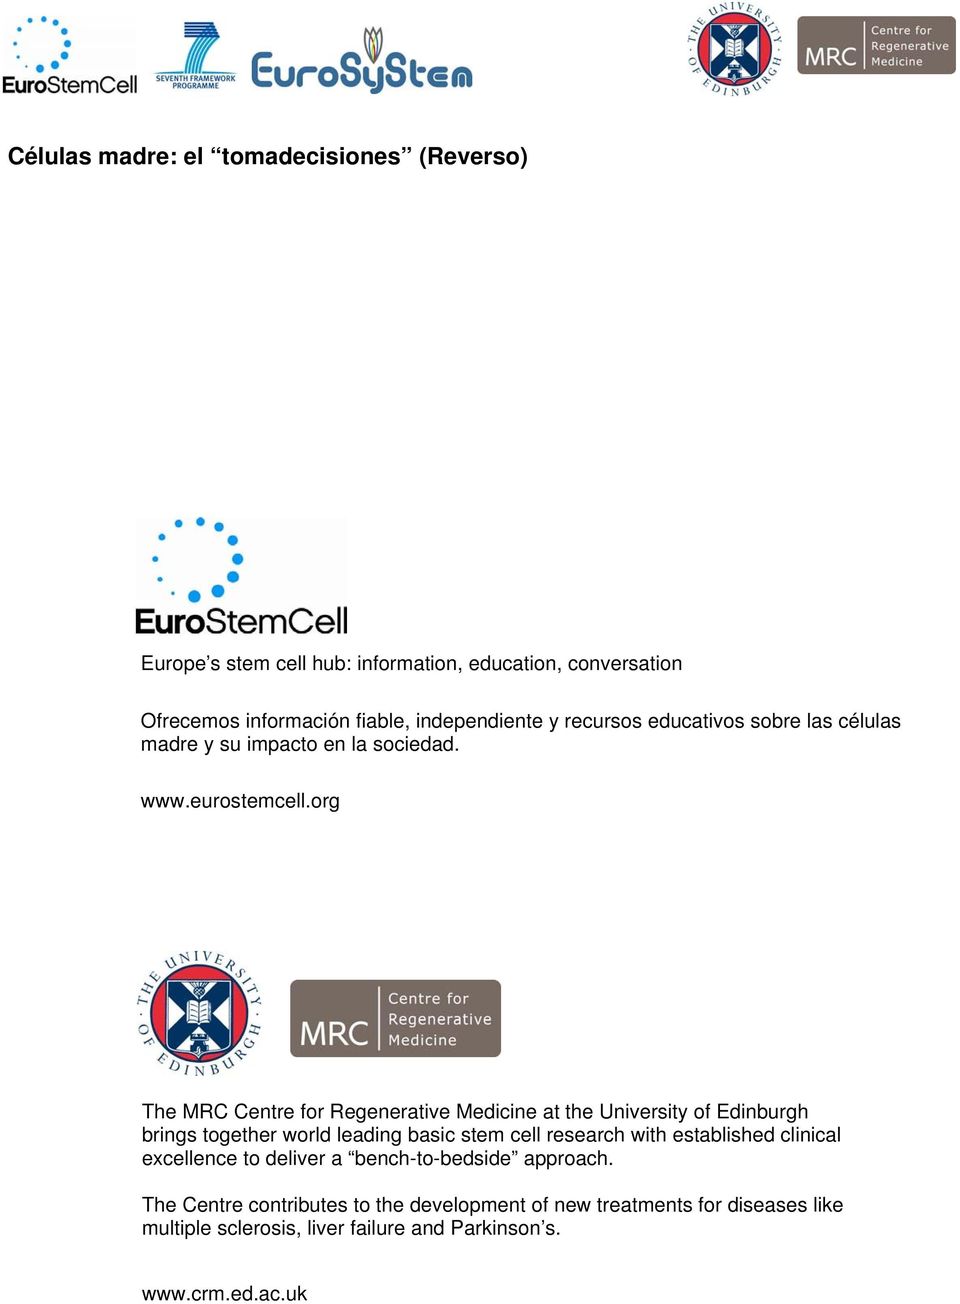 The MRC Centre for Regenerative Medicine at the University of Edinburgh brings together world leading basic stem cell research with